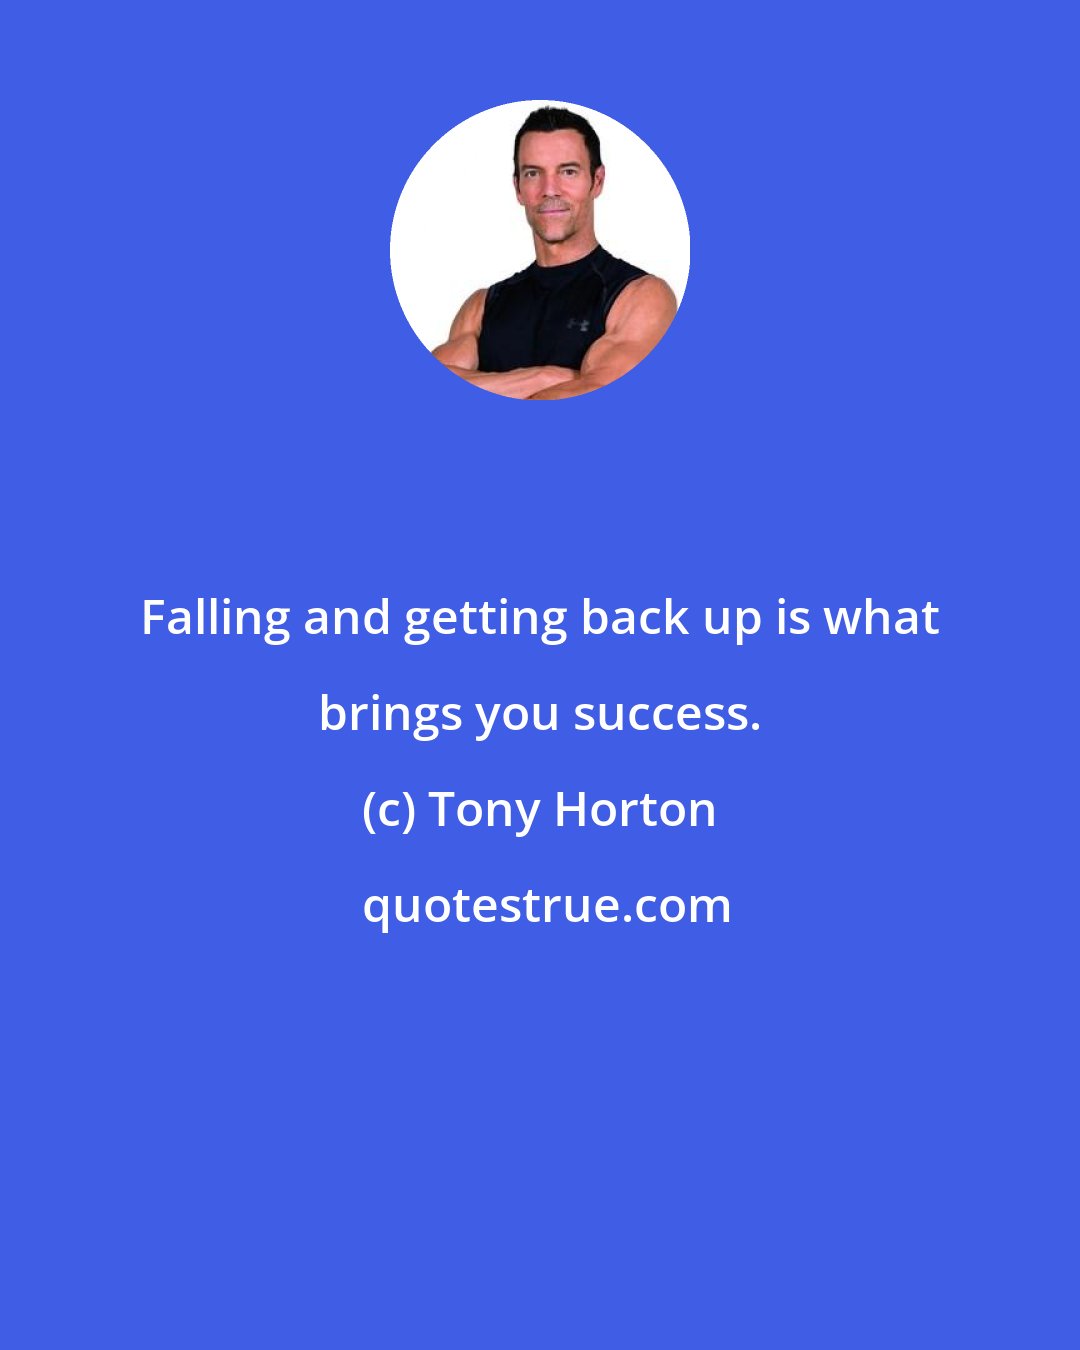 Tony Horton: Falling and getting back up is what brings you success.